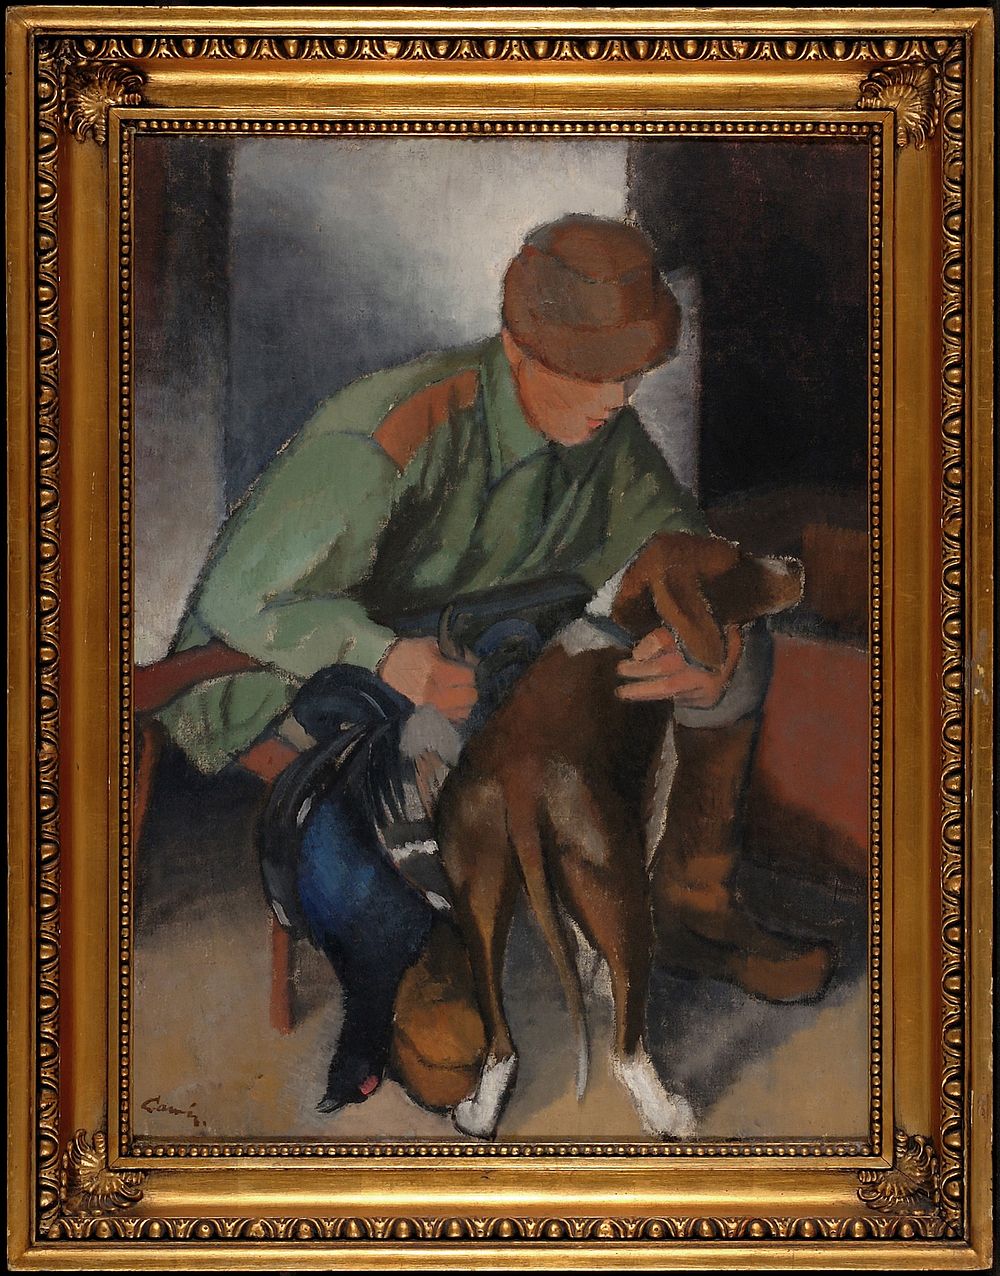 Hunter with his hound, 1920 - 1930